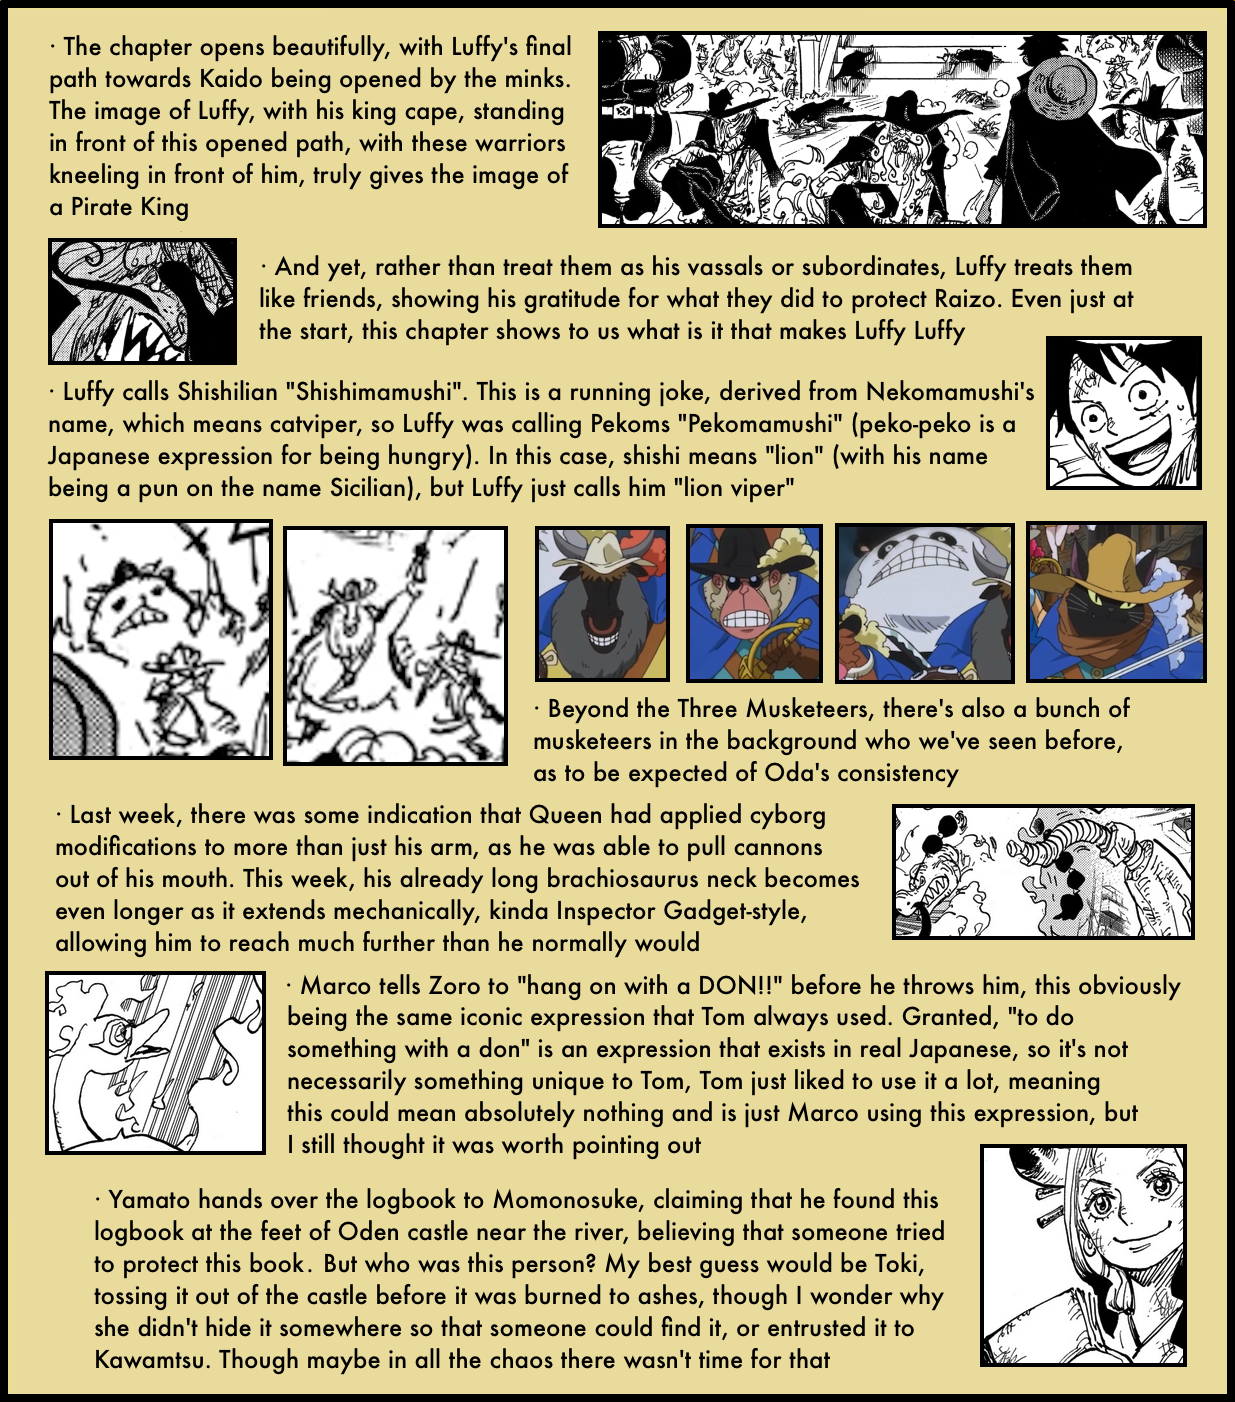 Chapter Secrets Chapter 1000 In Depth Analysis Explaining Luffy S Dream The Library Of Ohara